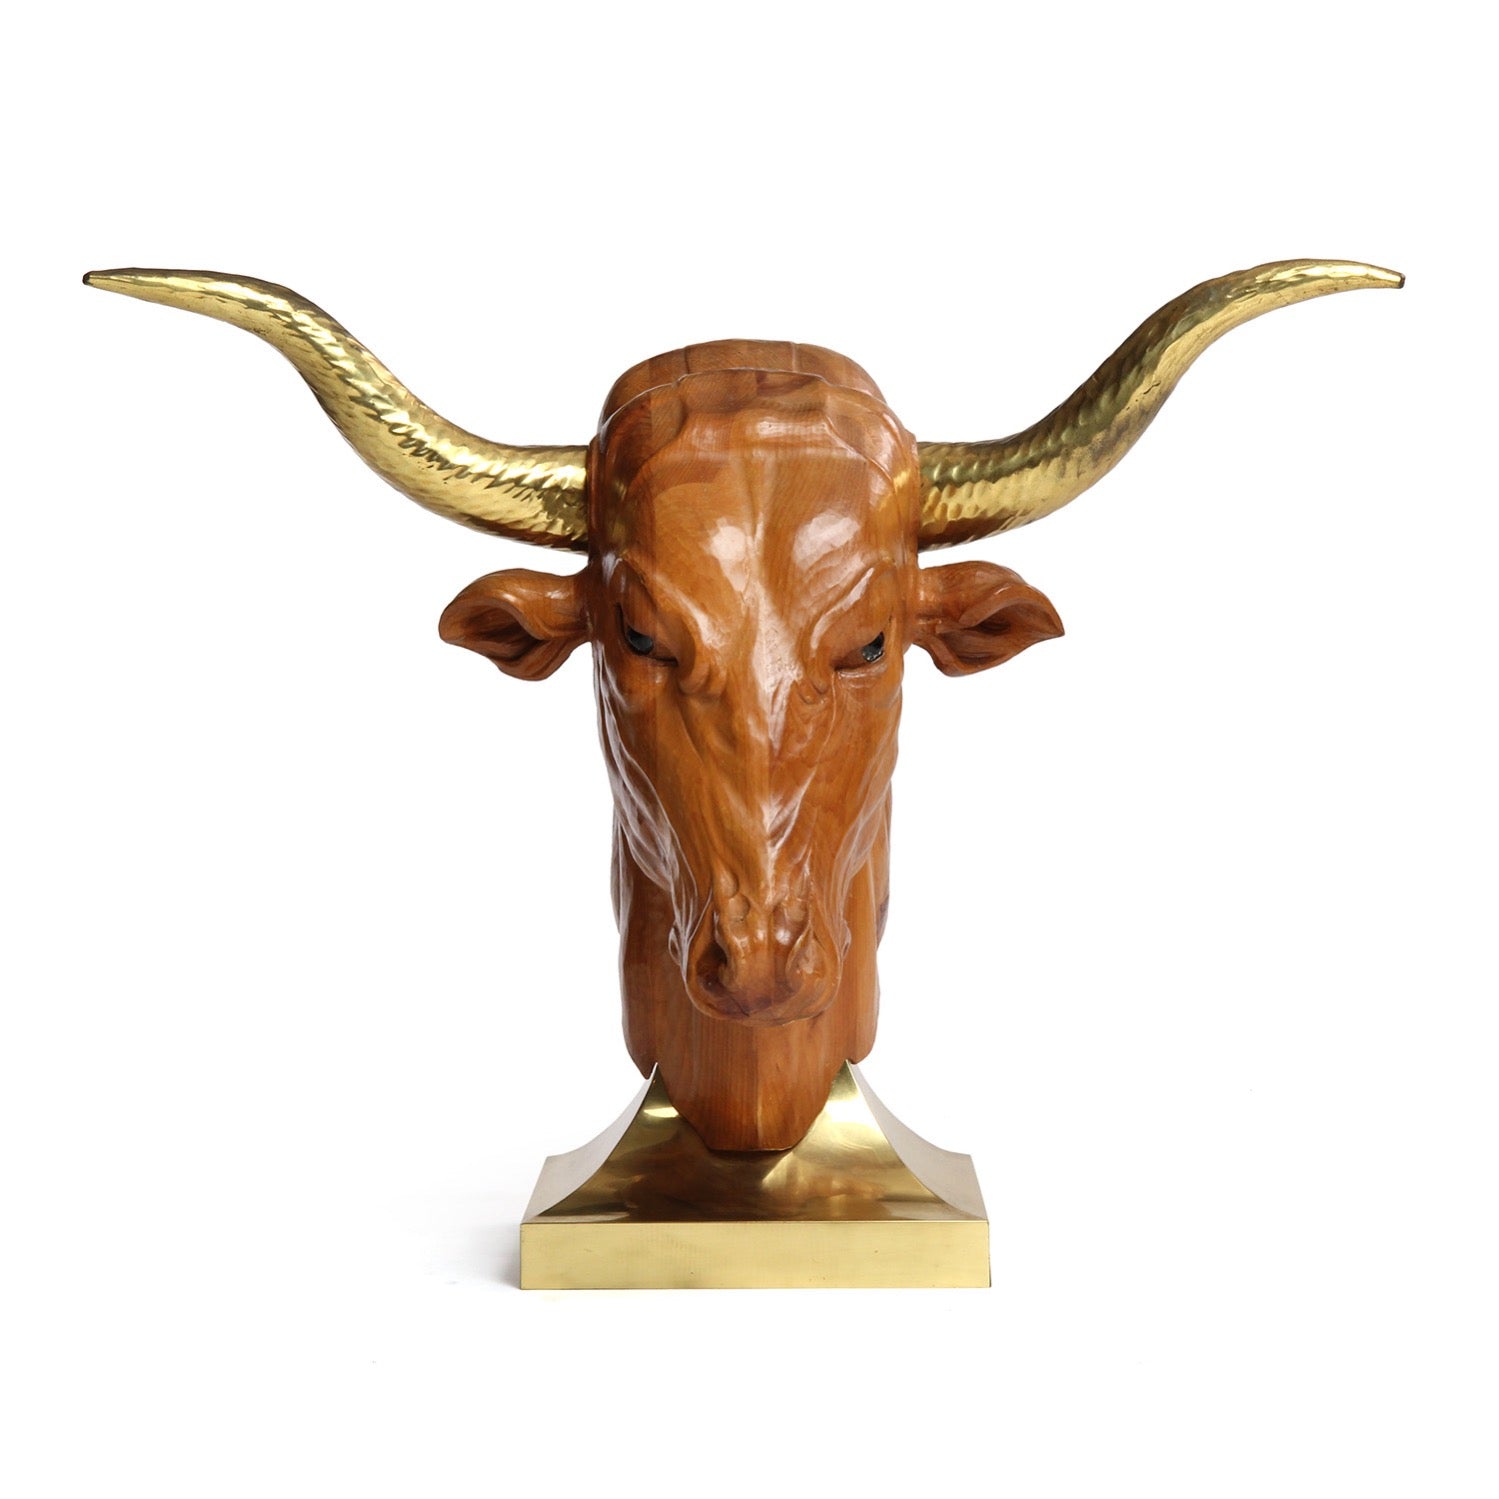 Carved Bull Sculpture from USA